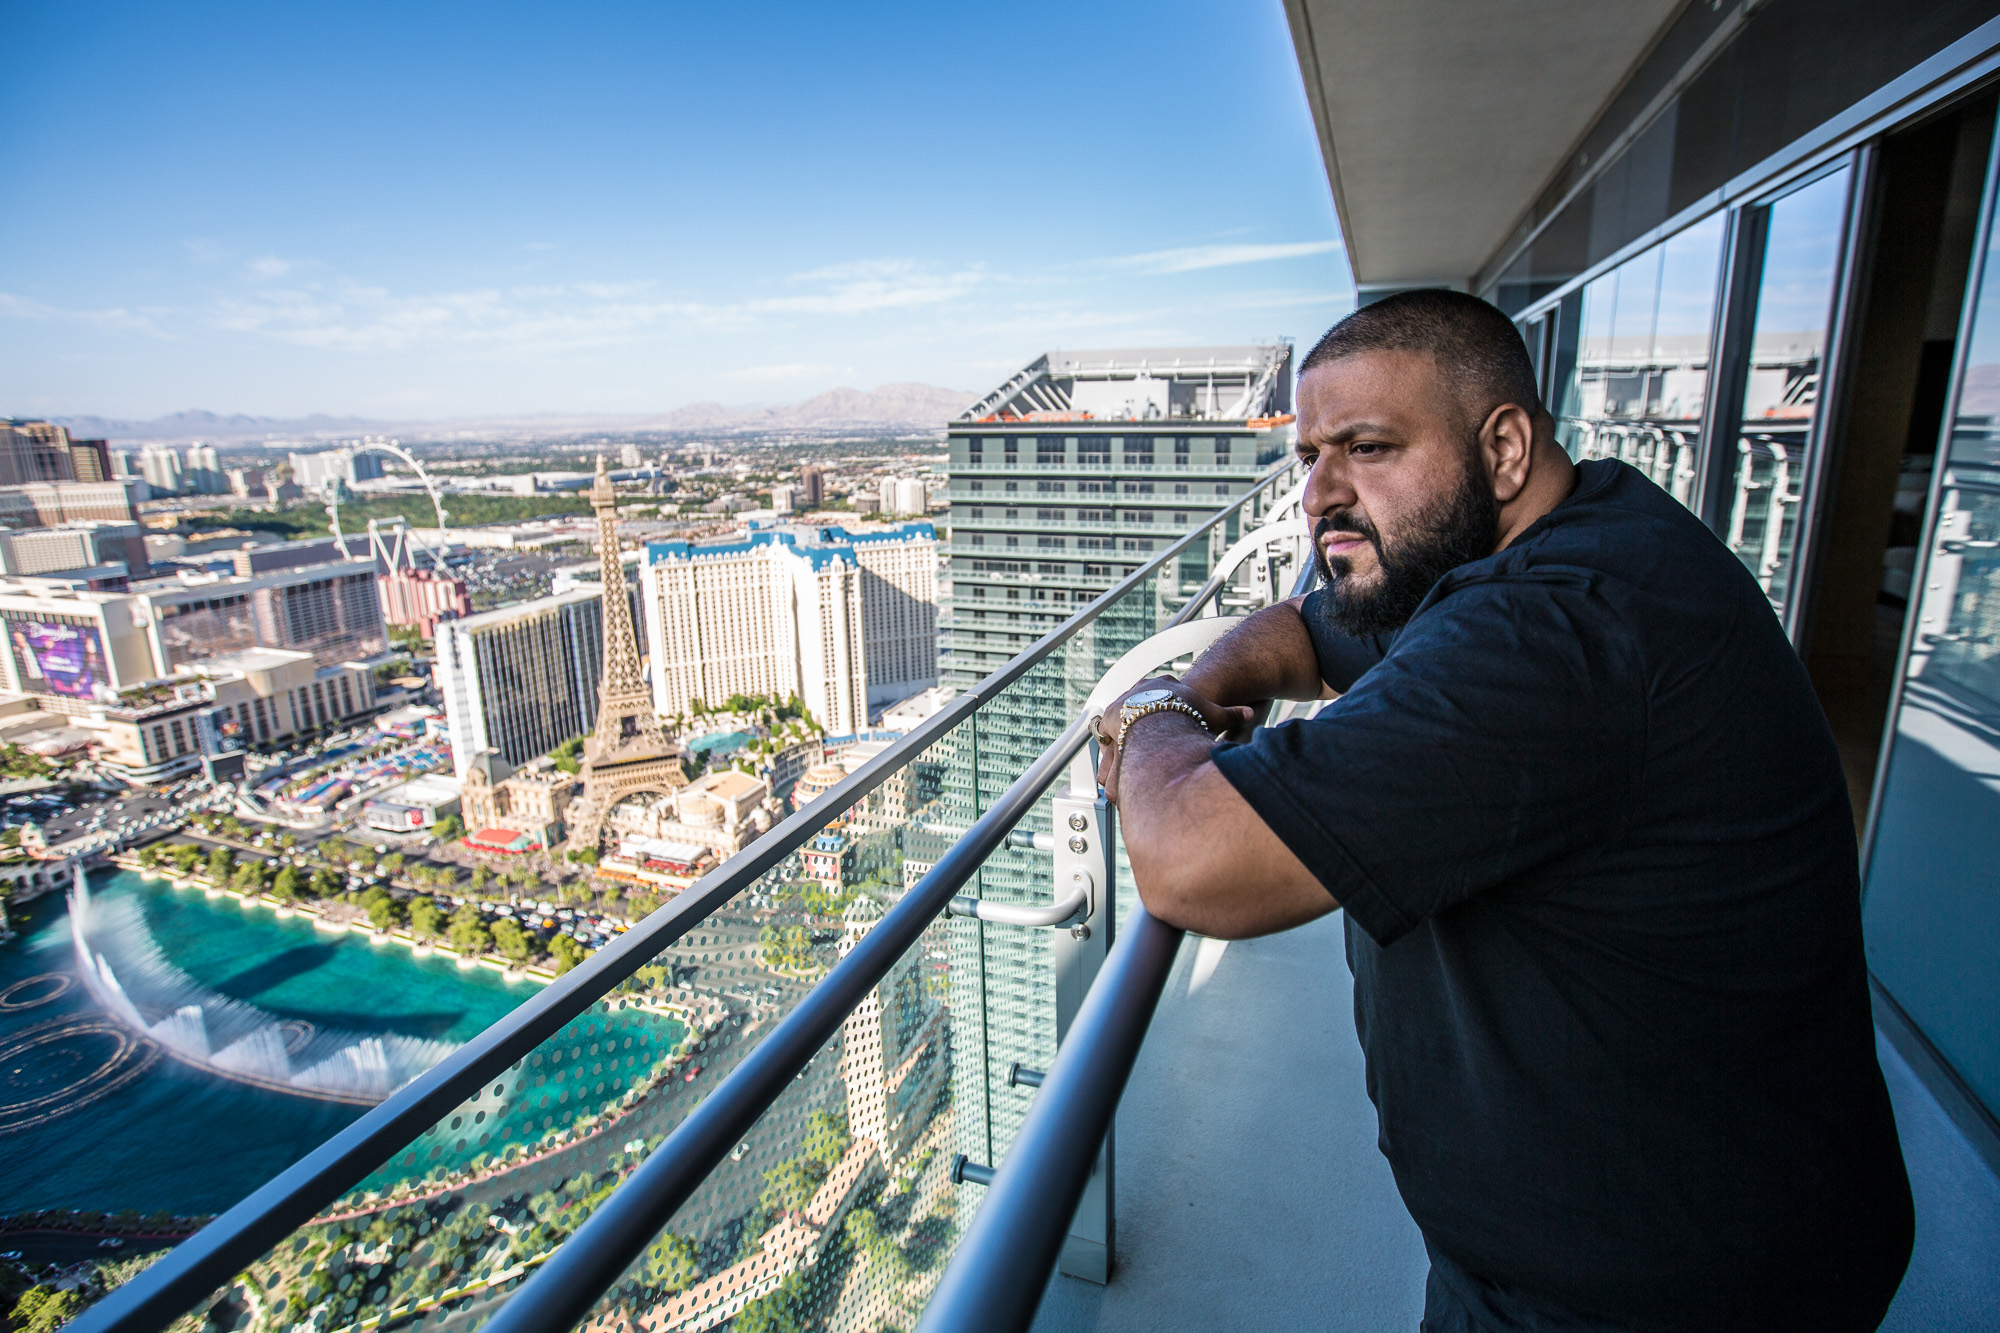 DJ Khaled enjoys breathtaking views of the Strip while launching the official Las Vegas Snapchat account